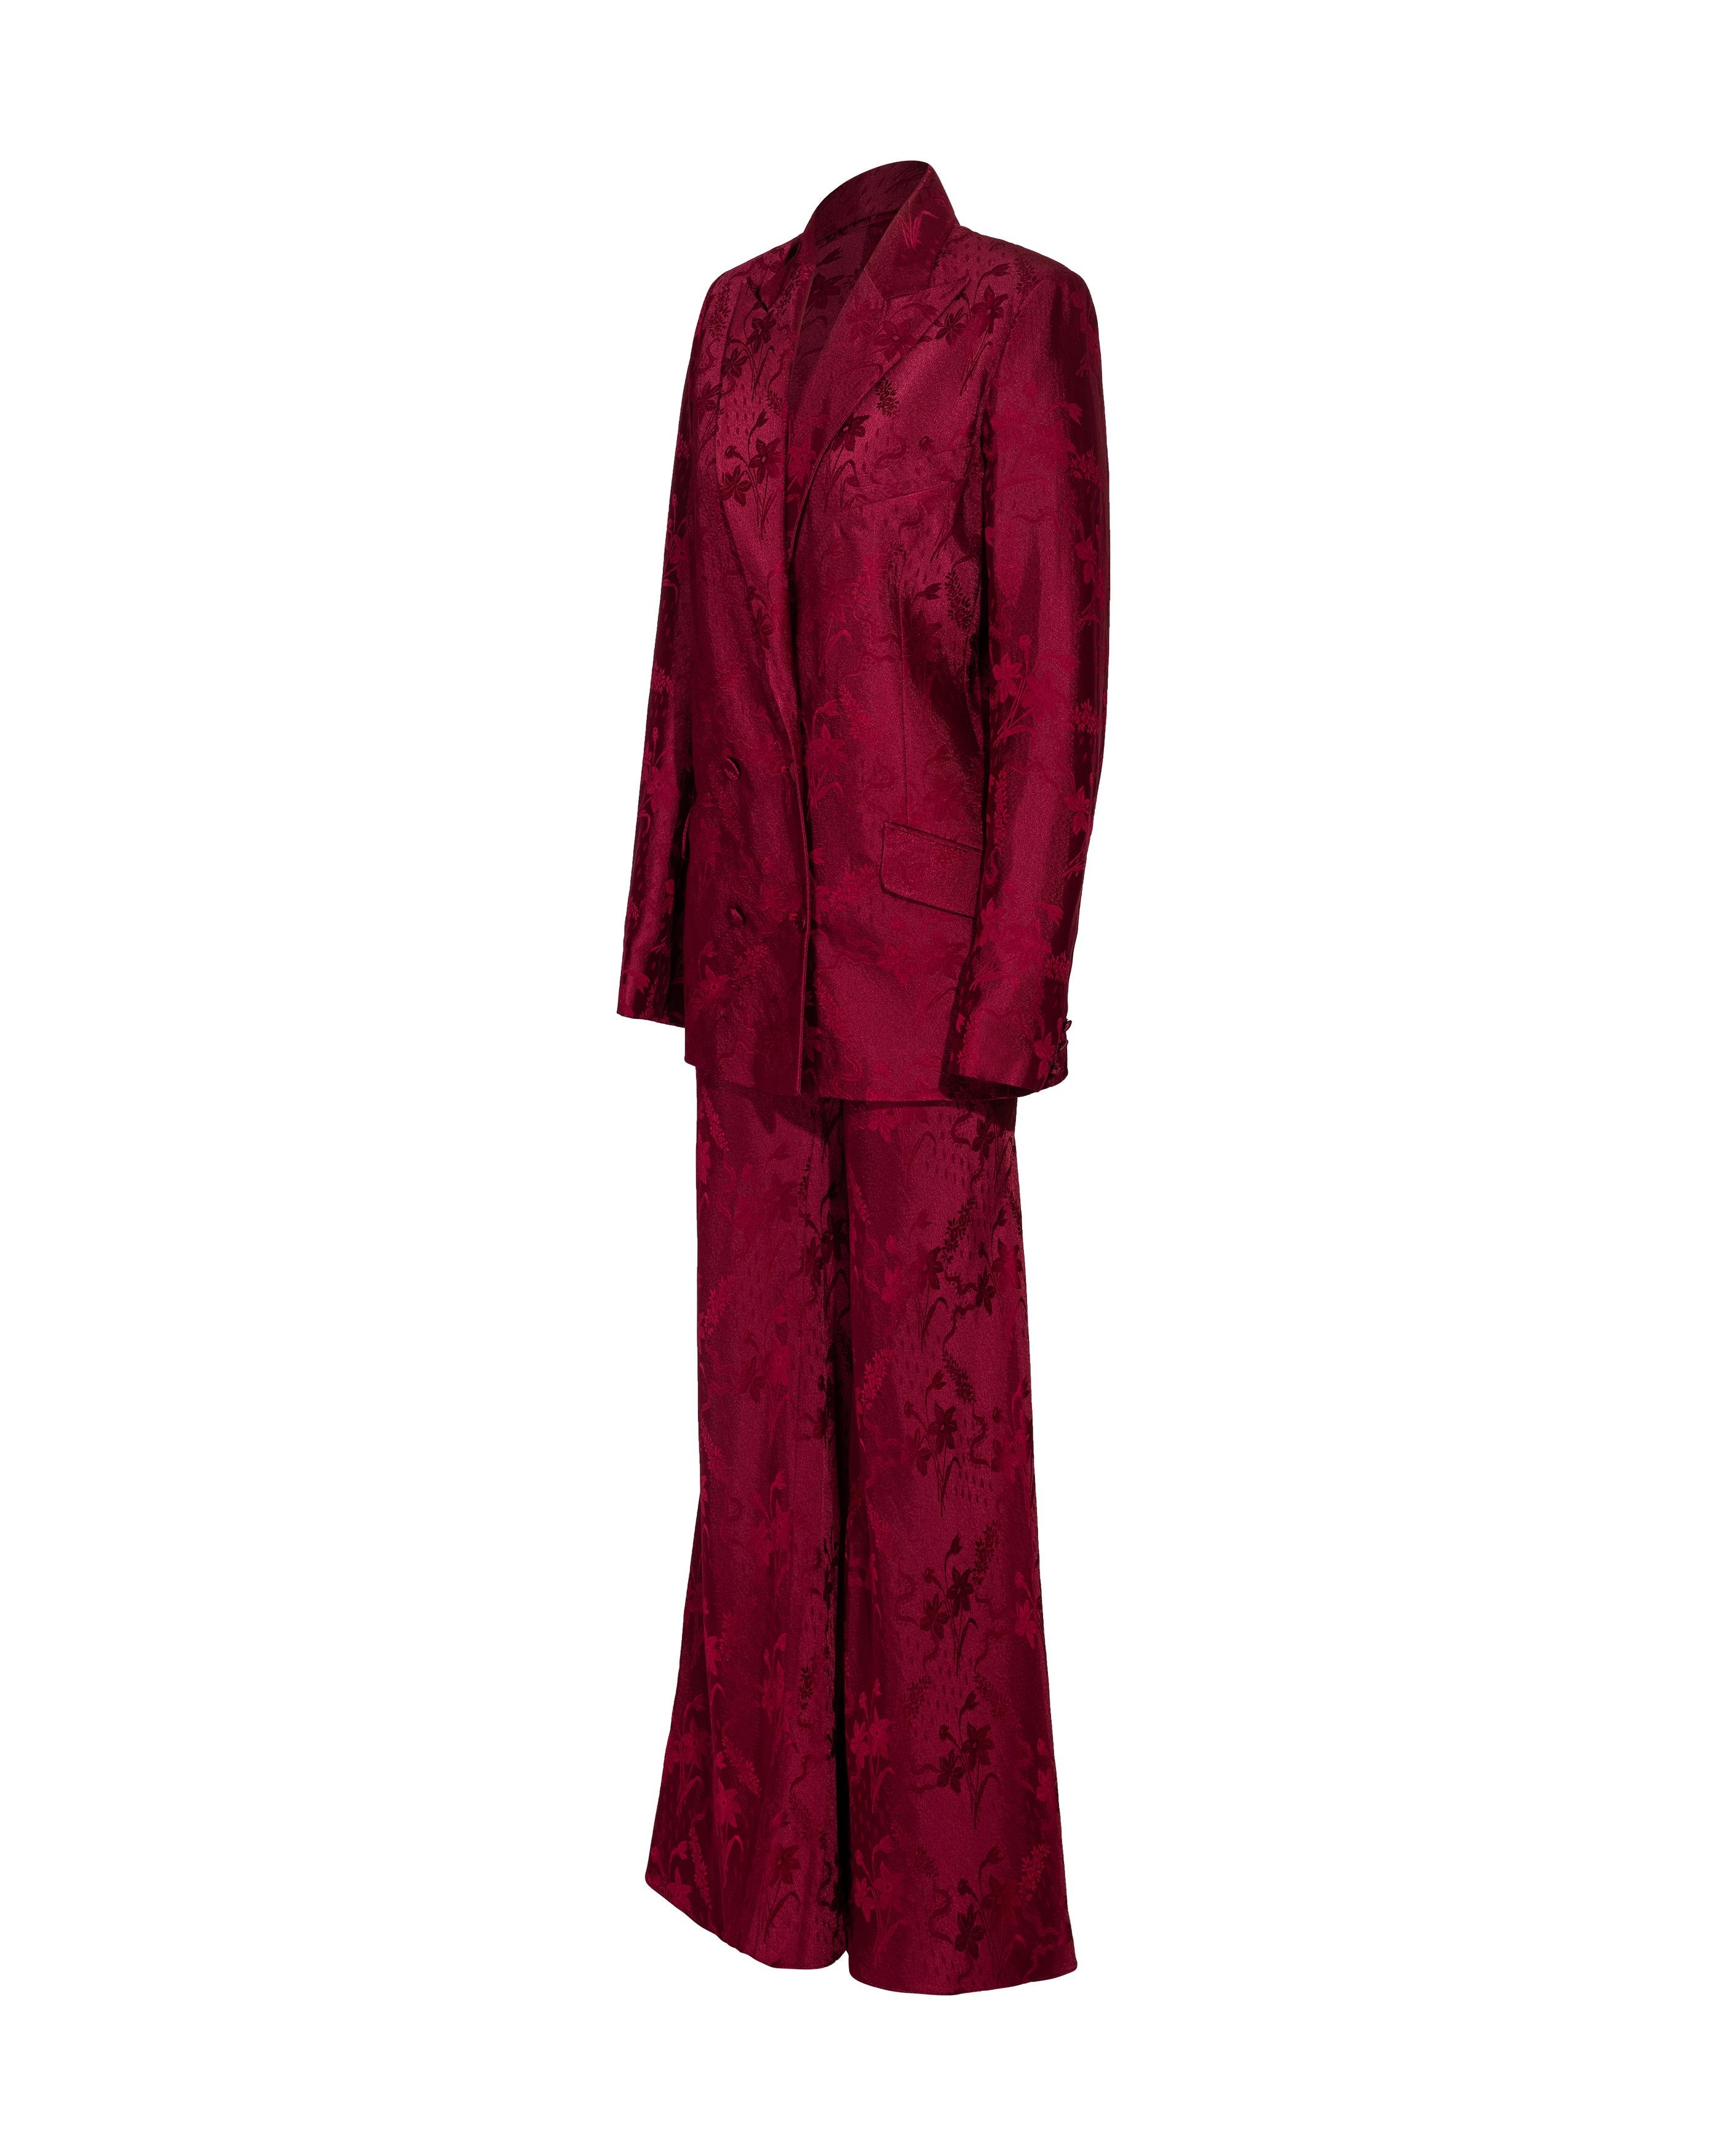 S/S 1998 John Galliano deep red floral pattern pant suit set. Deep red double-breasted blazer with notched lapels, floral motif pattern throughout and functional side flap pockets. Fully lined with bright fuchsia silk lining. Slight built-in